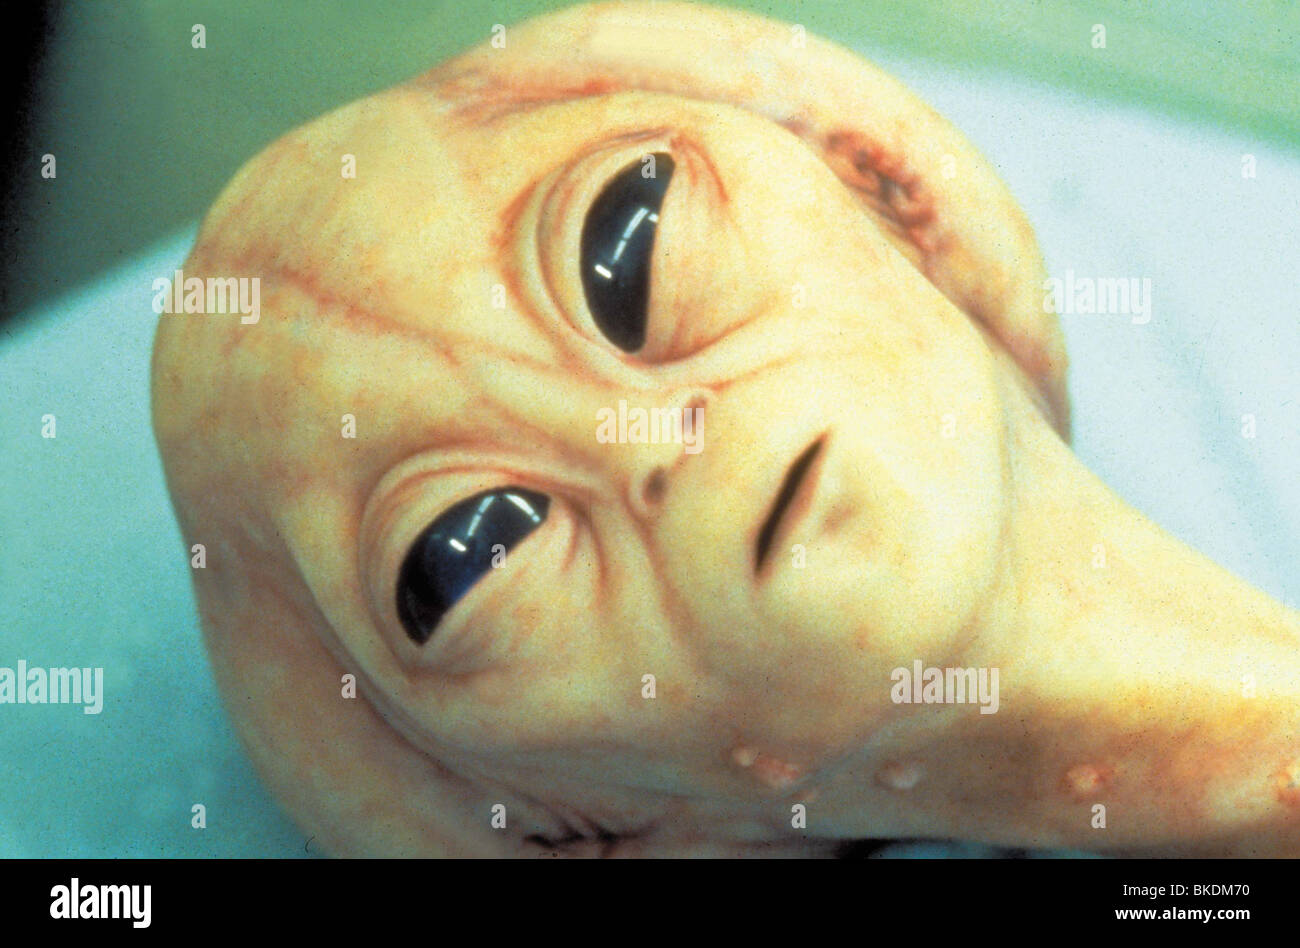 ROSWELL -1994 ROSW 7 CREDIT VIACOM Stock Photo